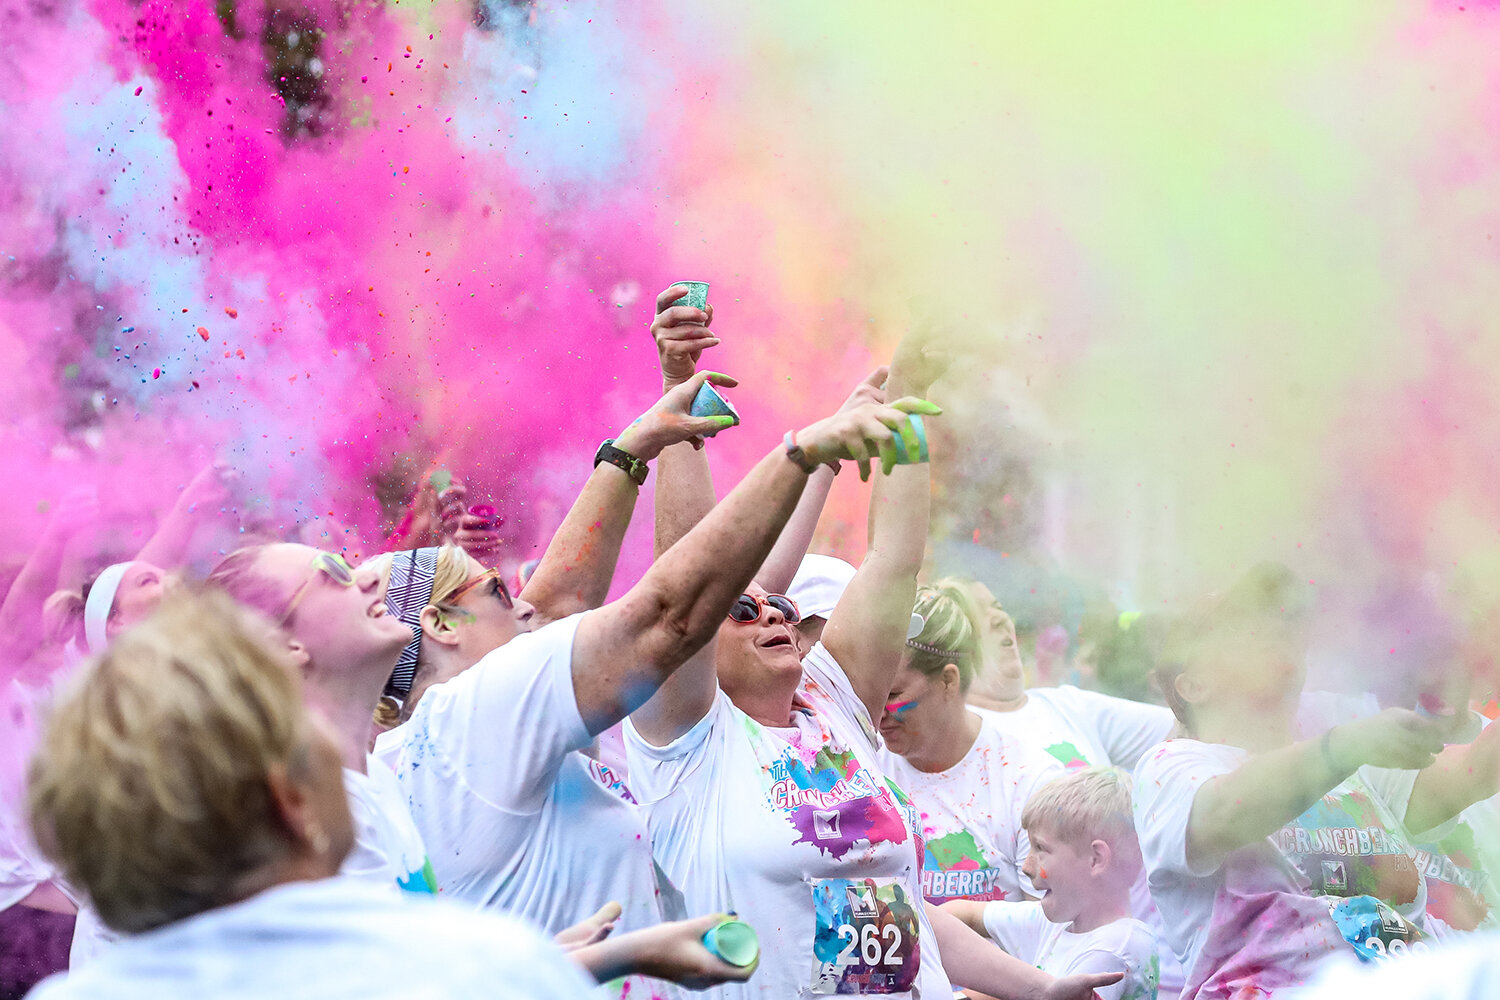  Participants toss colored powder in the air before the Crunch Berry Run in downtown Cedar Rapids on Saturday, Sep. 21, 2019. The Crunch Berry Run is a 5k/1-mile color run designed to raise money for local nonprofits.  